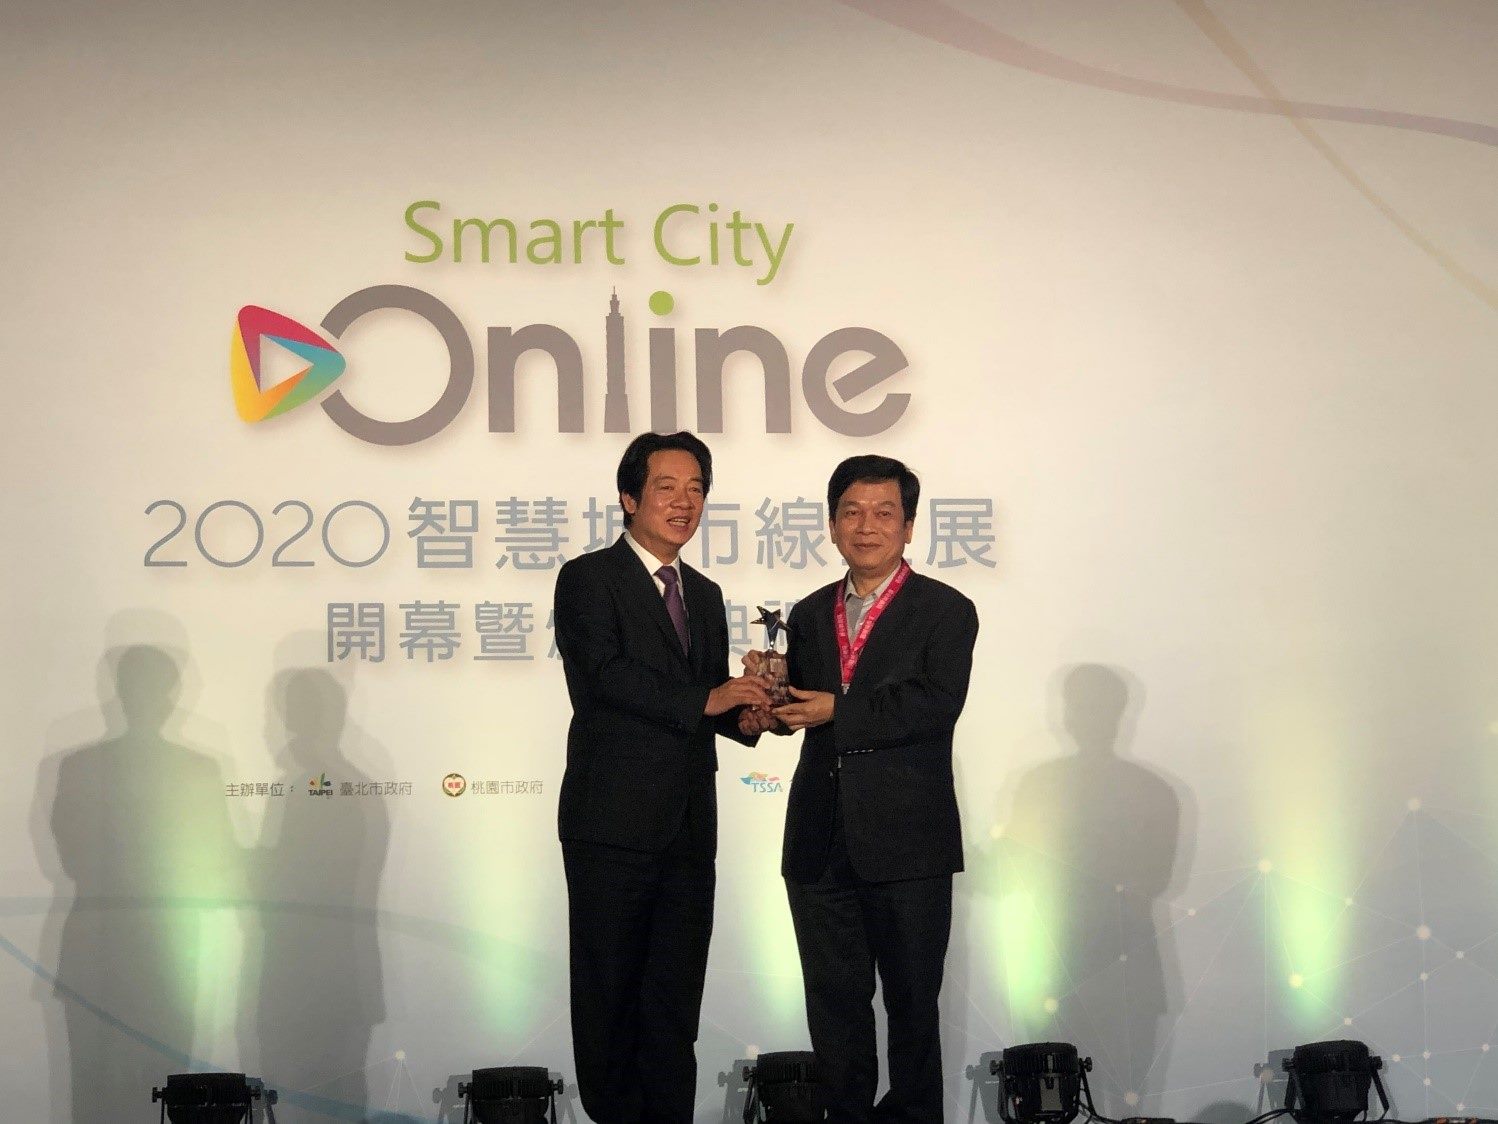 Award ceremony of the 2020 Smart City Online Exhibition